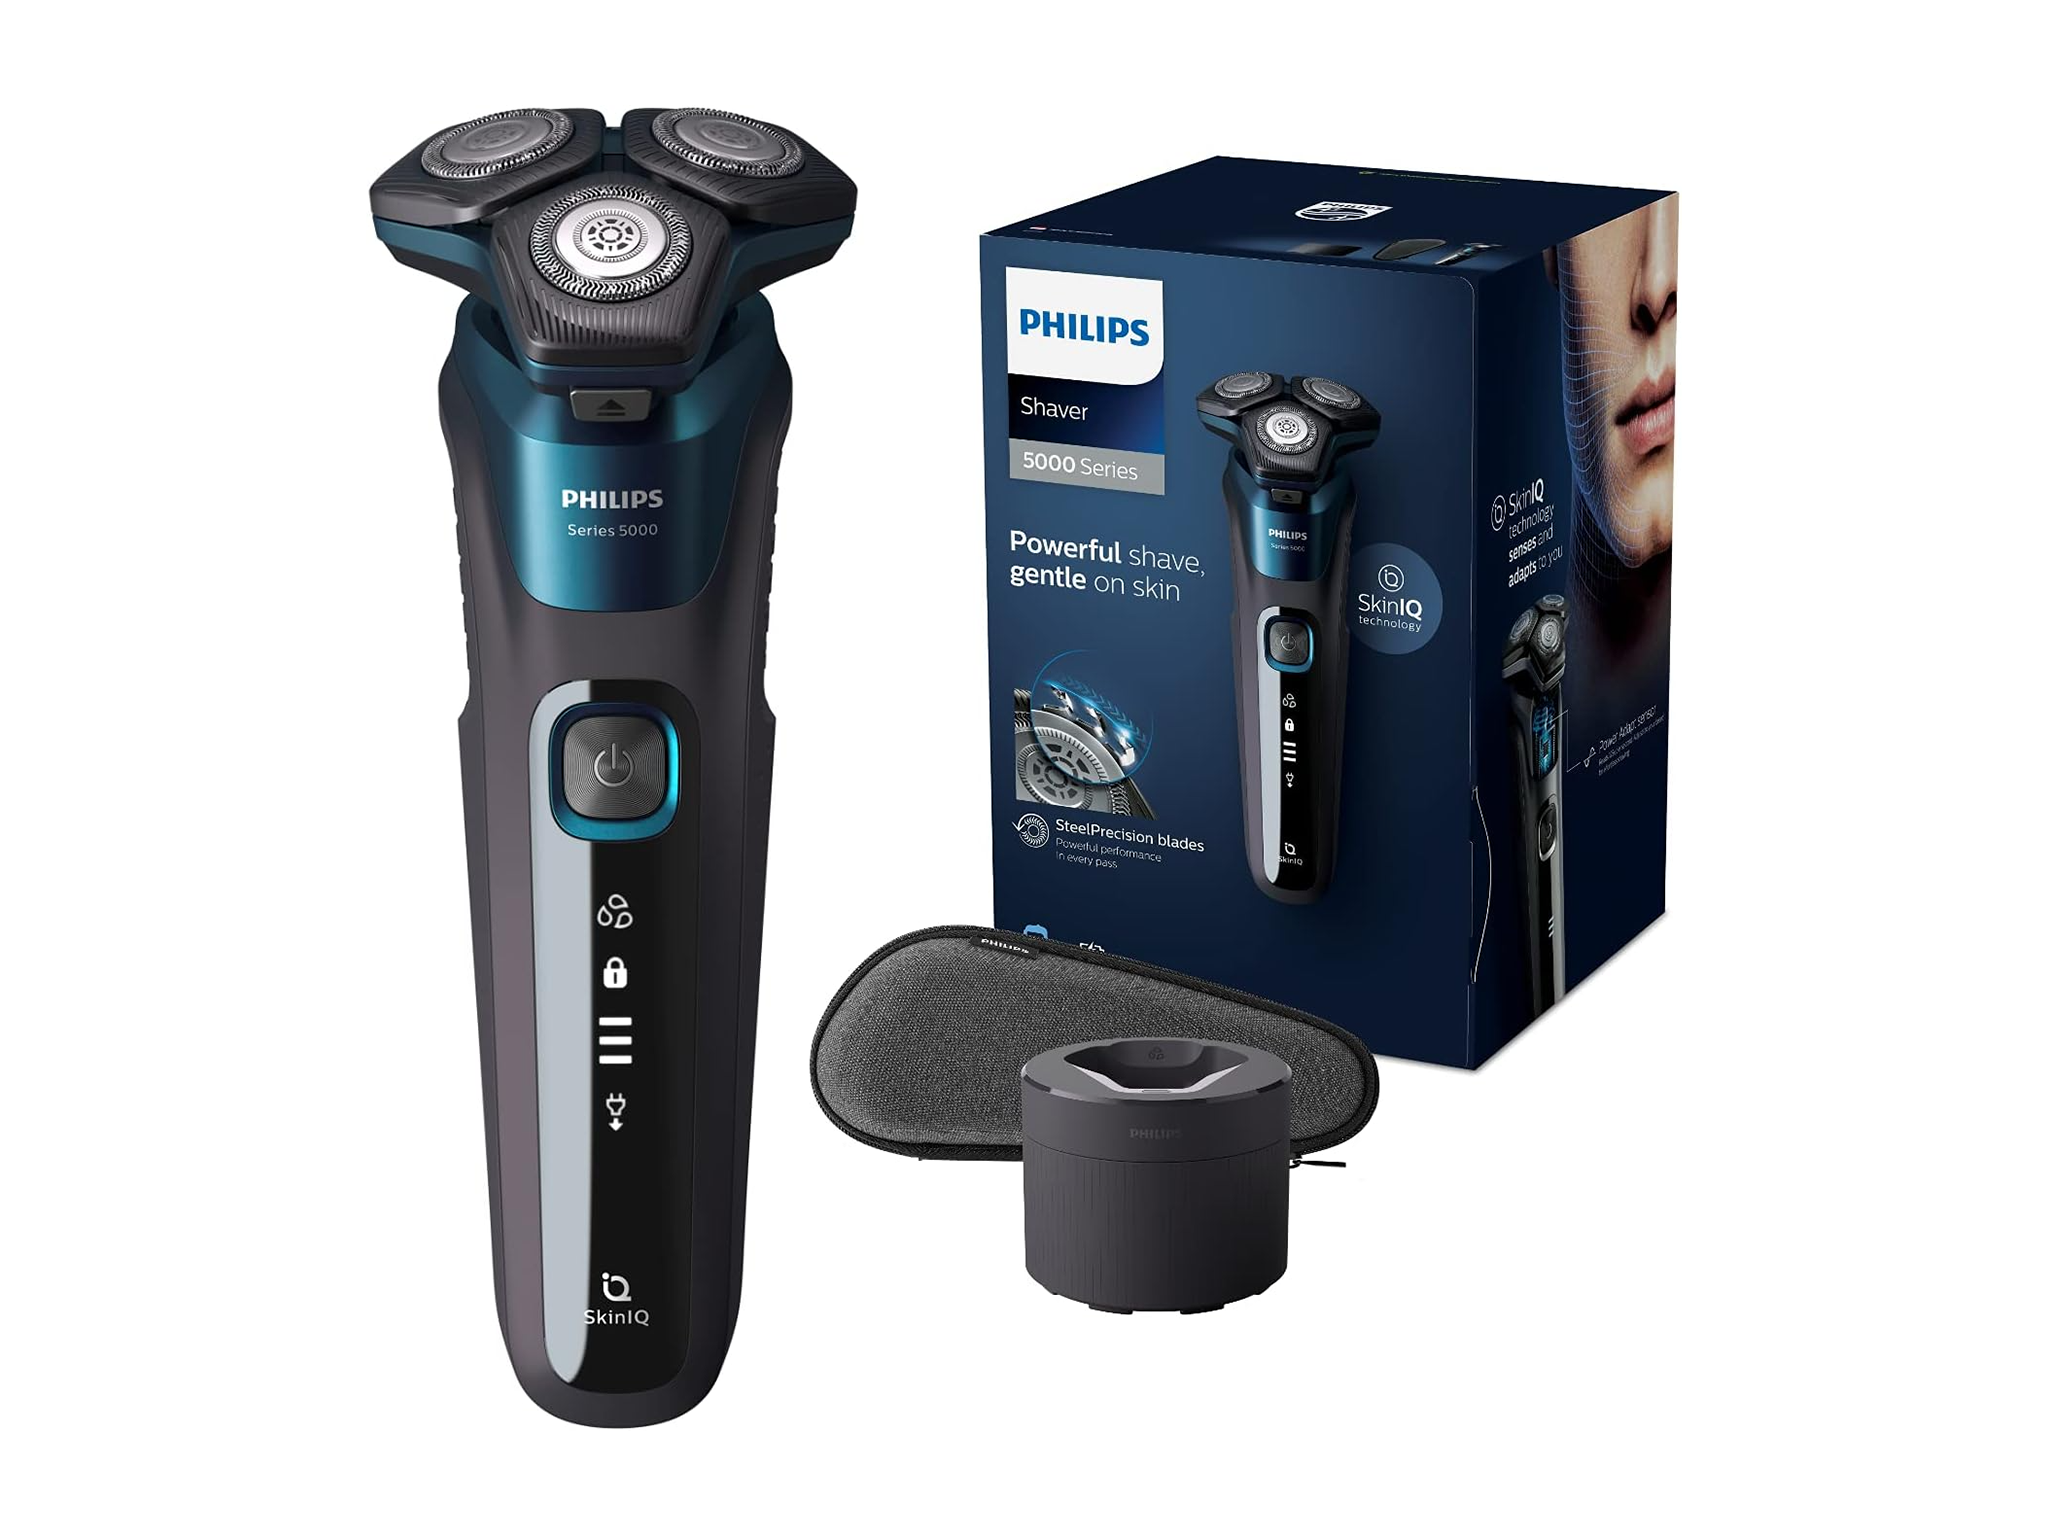 Philips 5000 series S5579/50 shaver